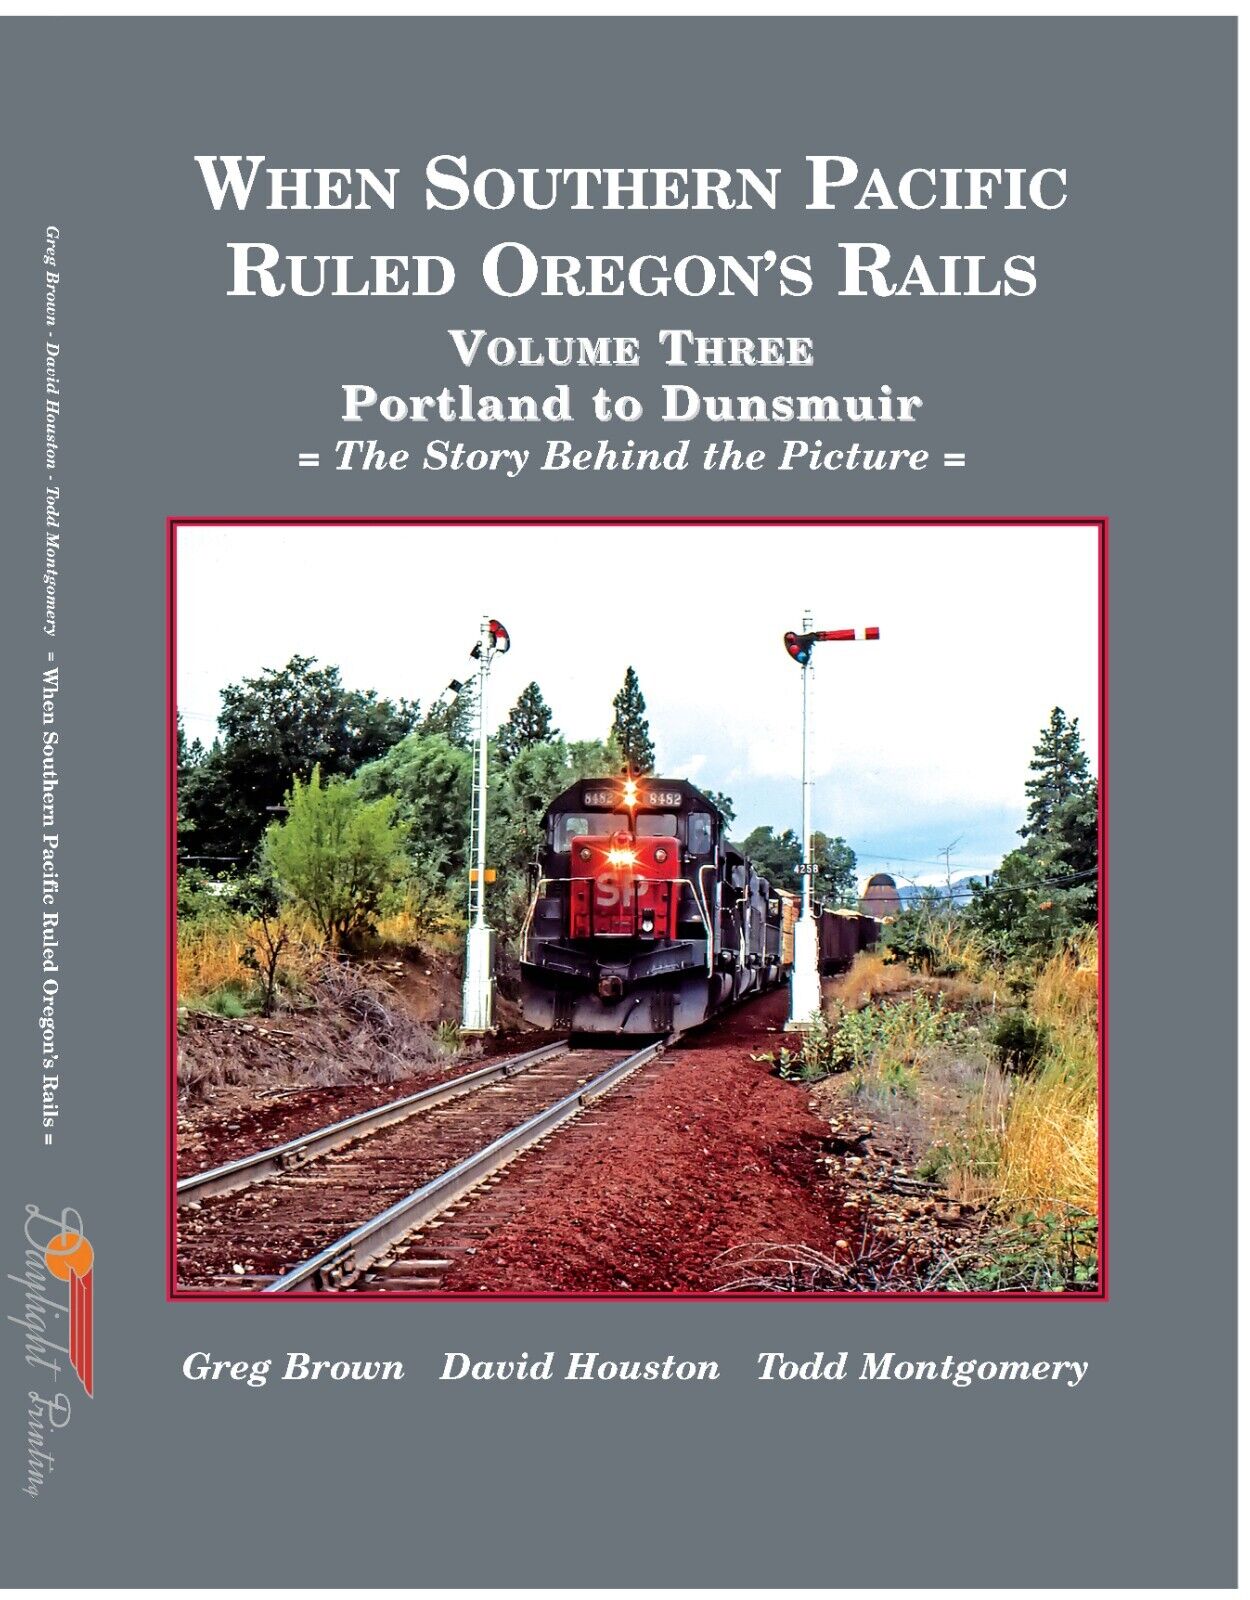 Southern Pacific, The Story Behind The Picture V3 Portland to Dunsmuir 